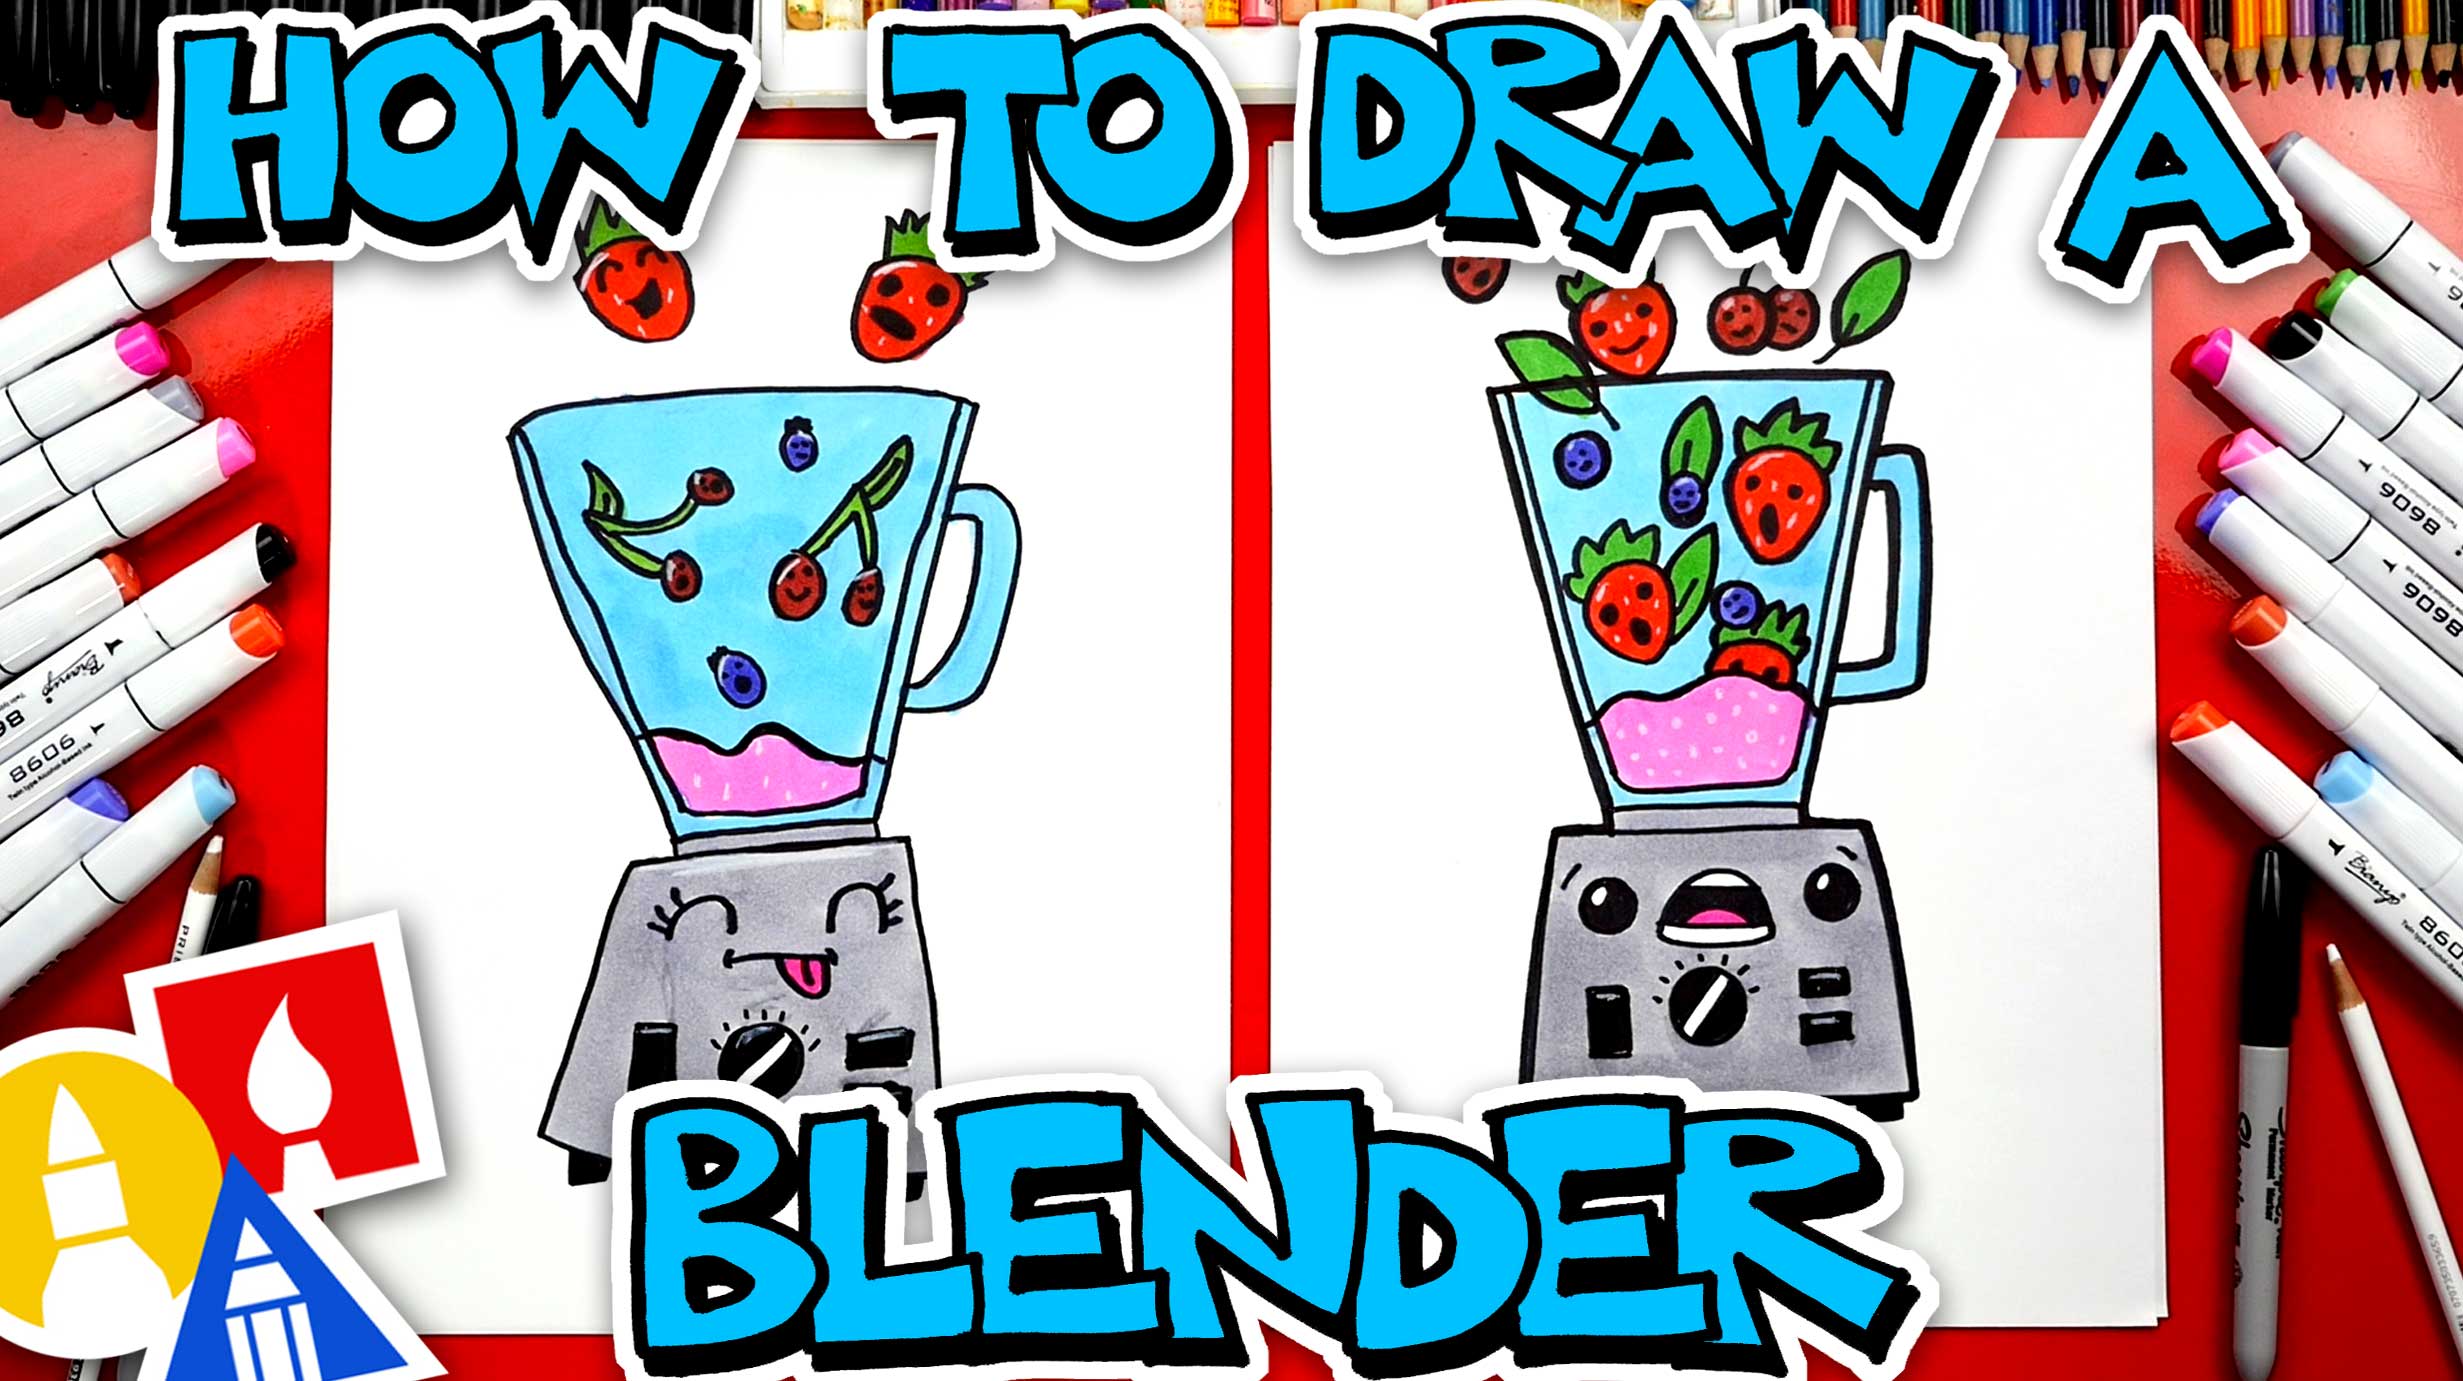 How To Draw A Funny Blender - Art For Kids Hub